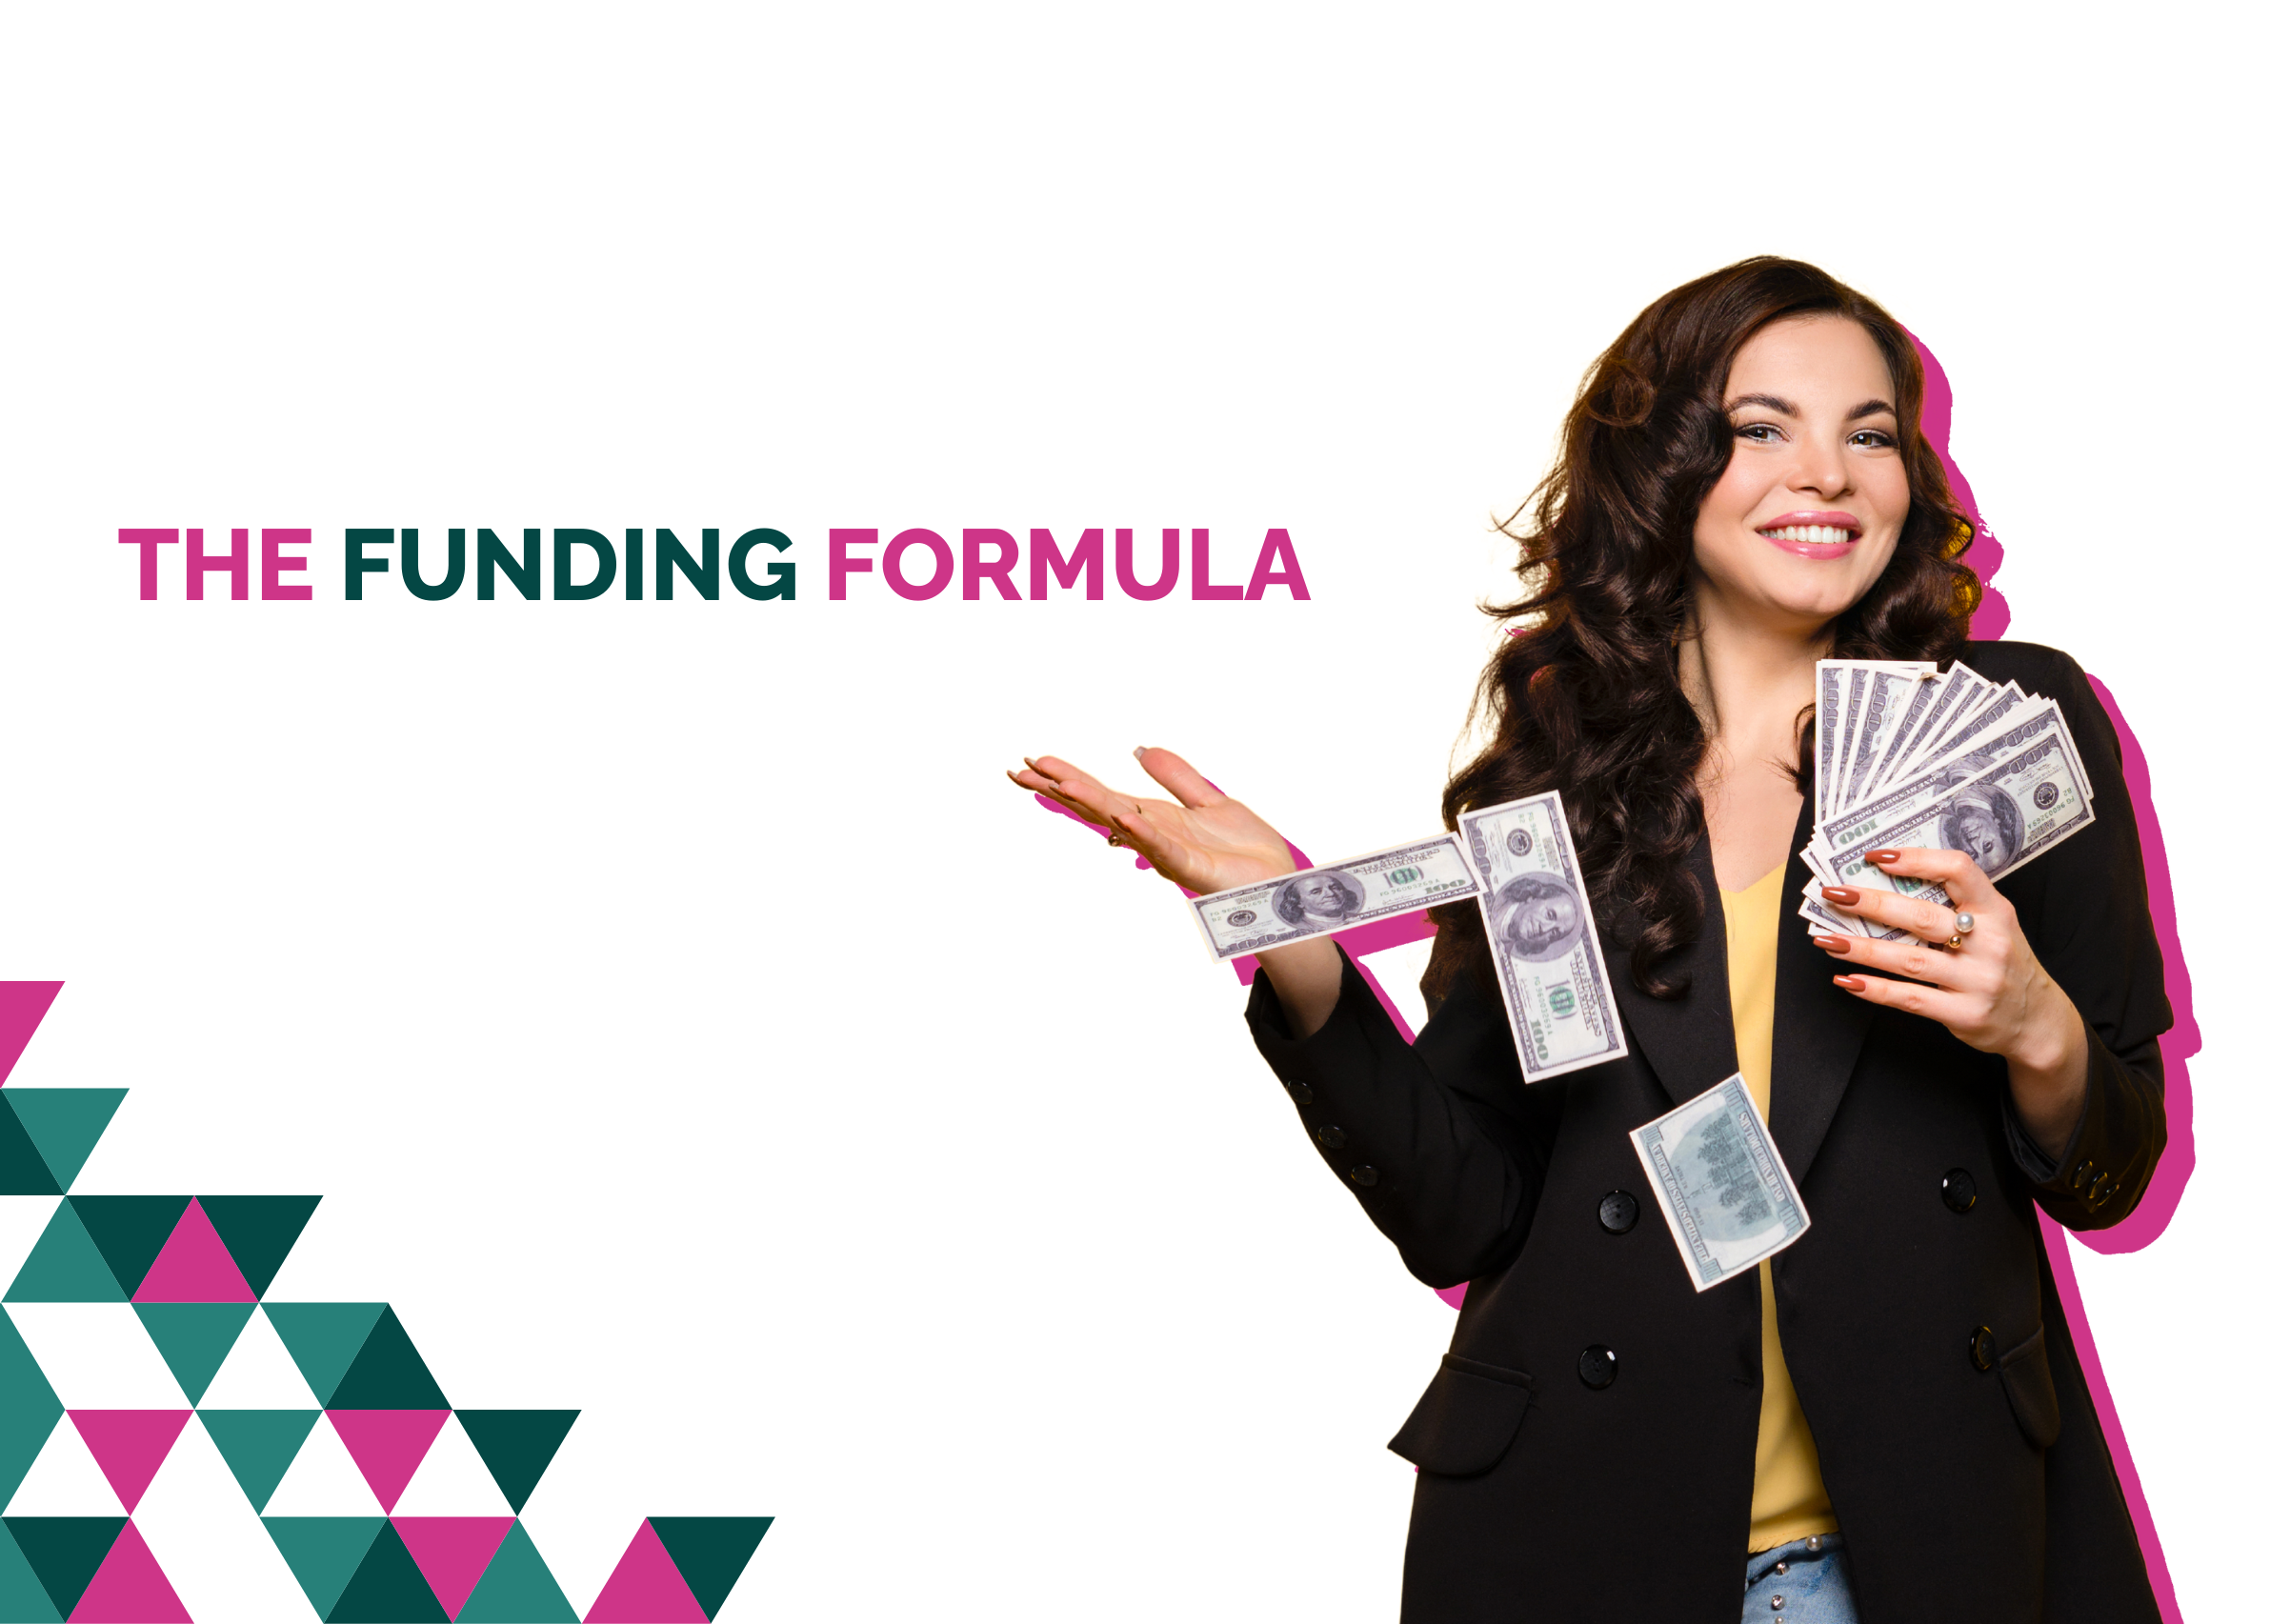 Welcome to The Funding Formula